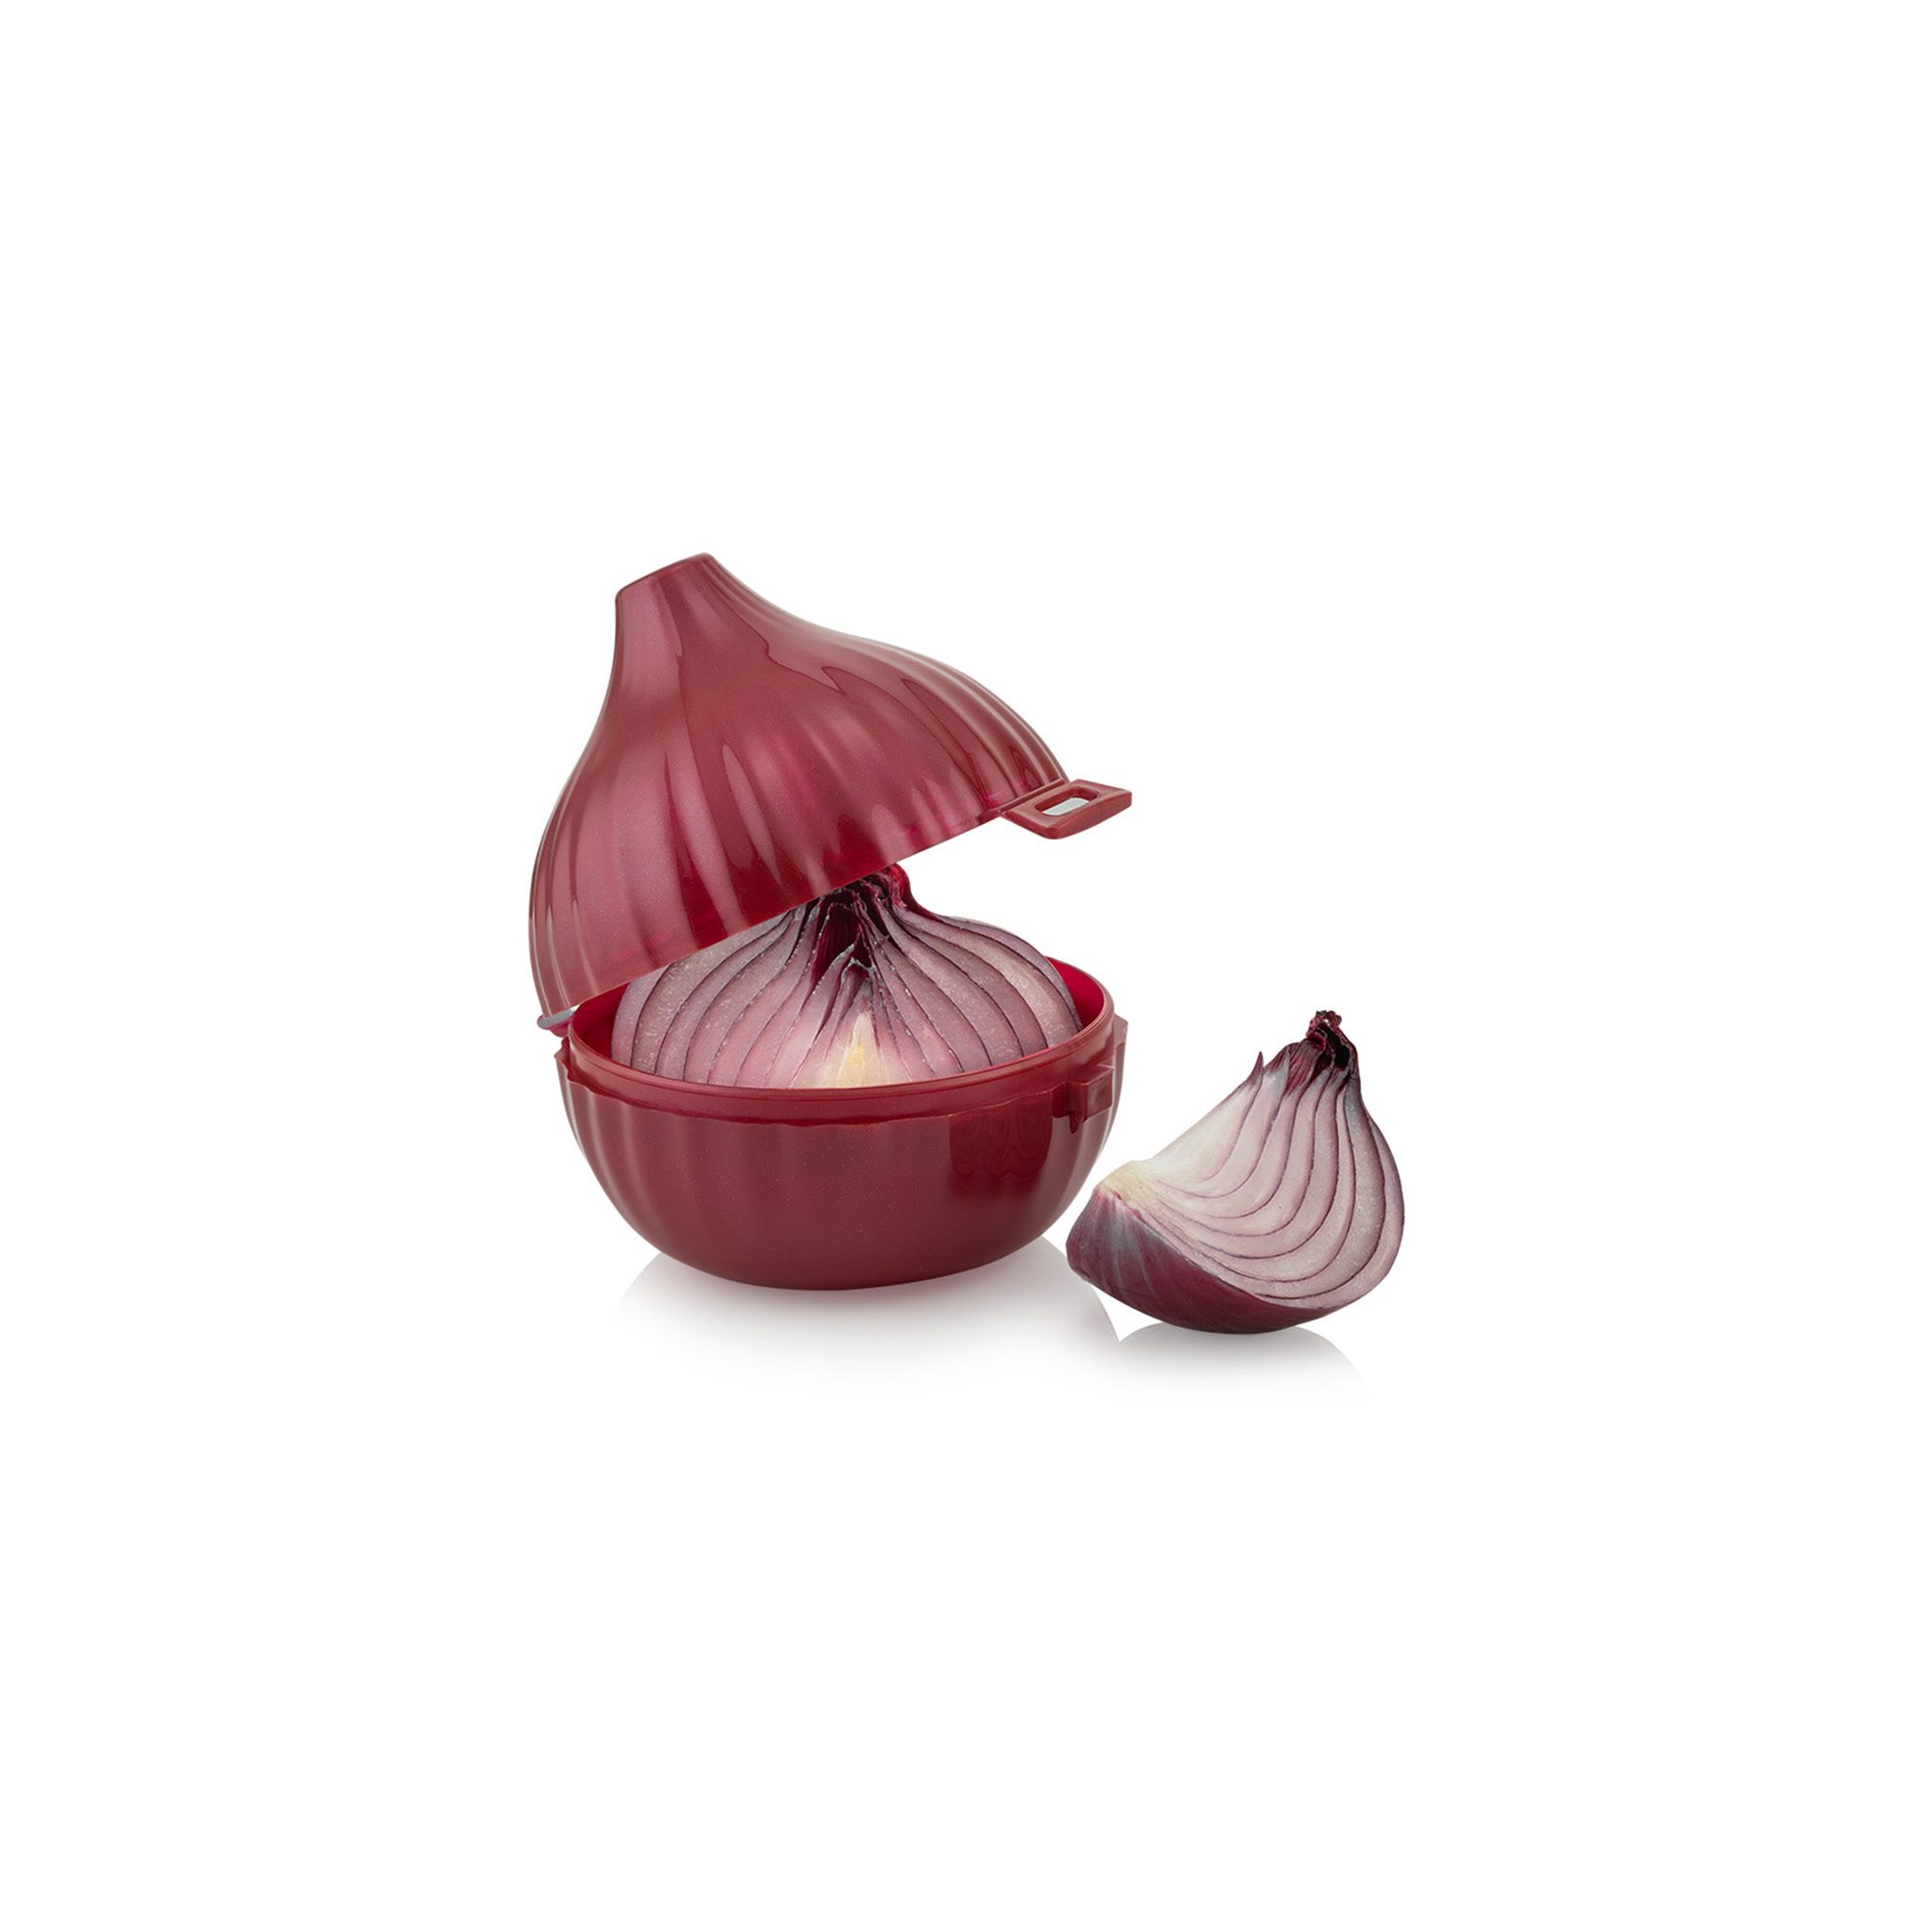 A container of onions Qlux L-00393